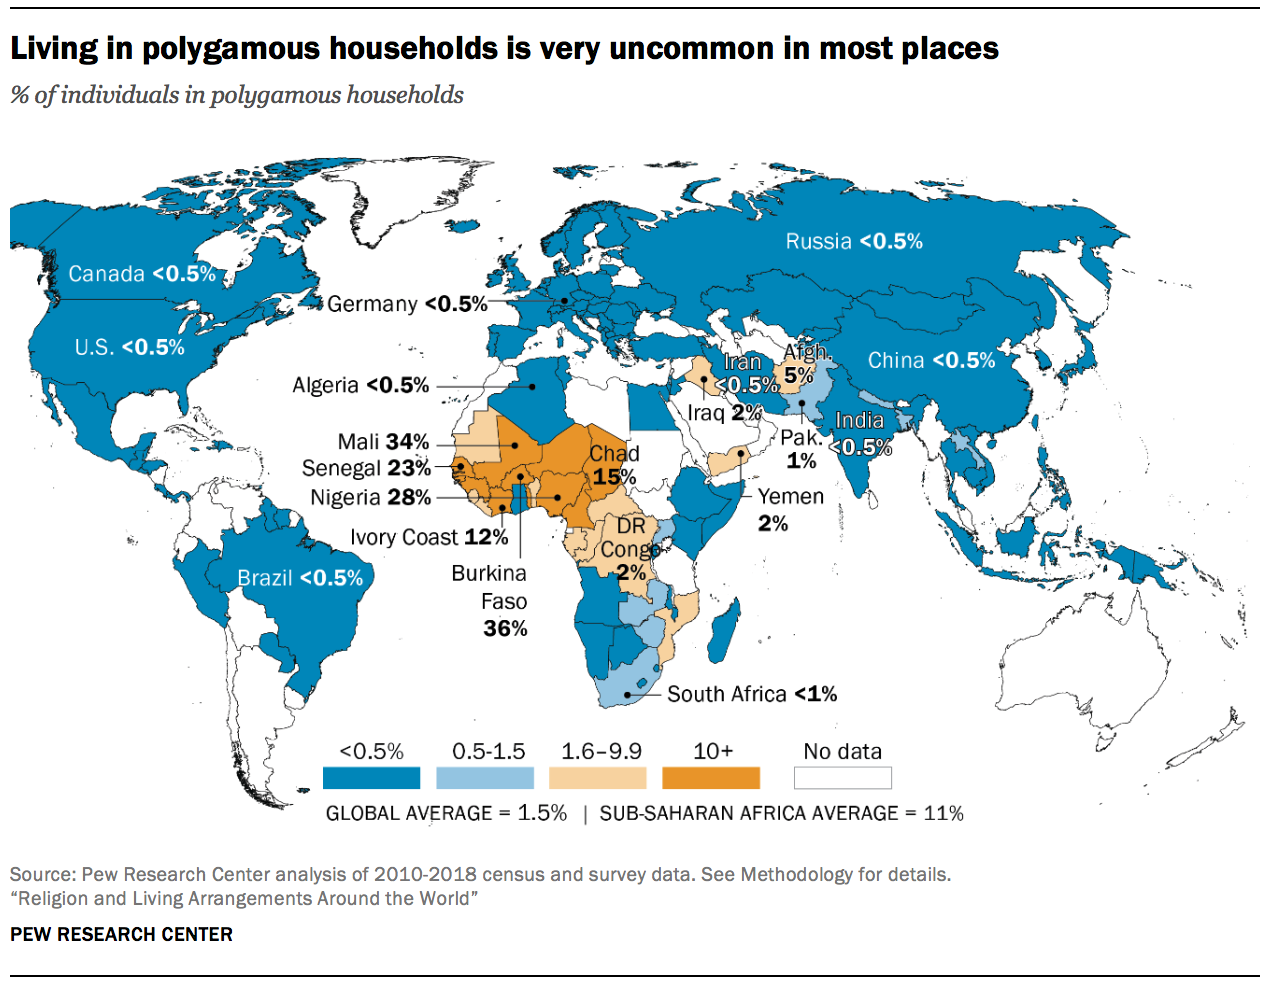 Living in polygamous households is very uncommon in most places